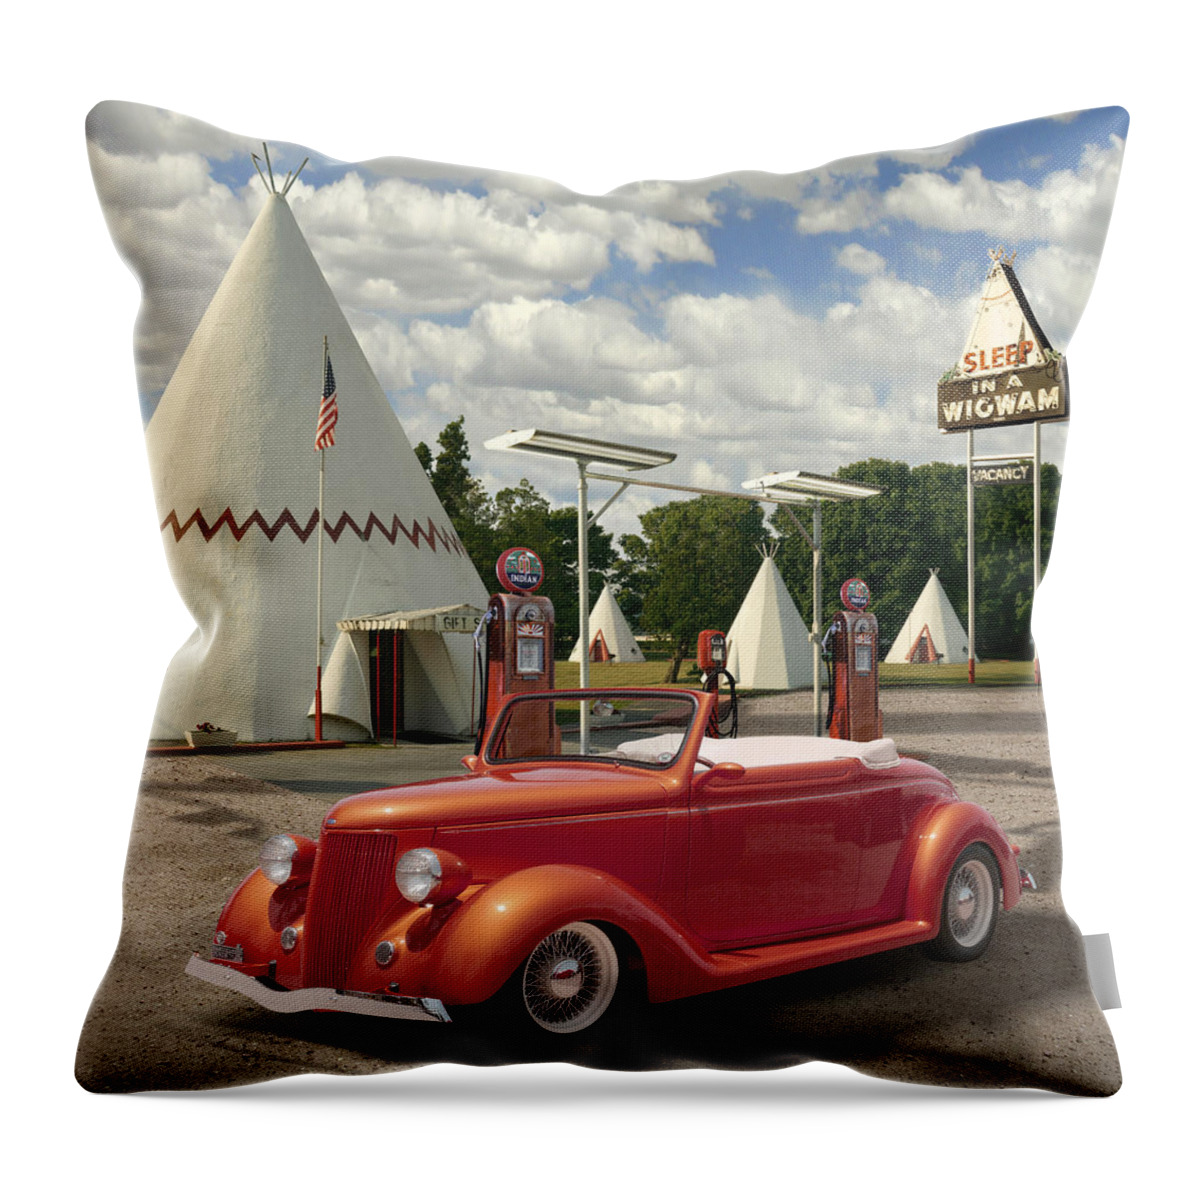 Ford Roadster Throw Pillow featuring the photograph Ford Roadster At An Indian Gas Station 2 by Mike McGlothlen